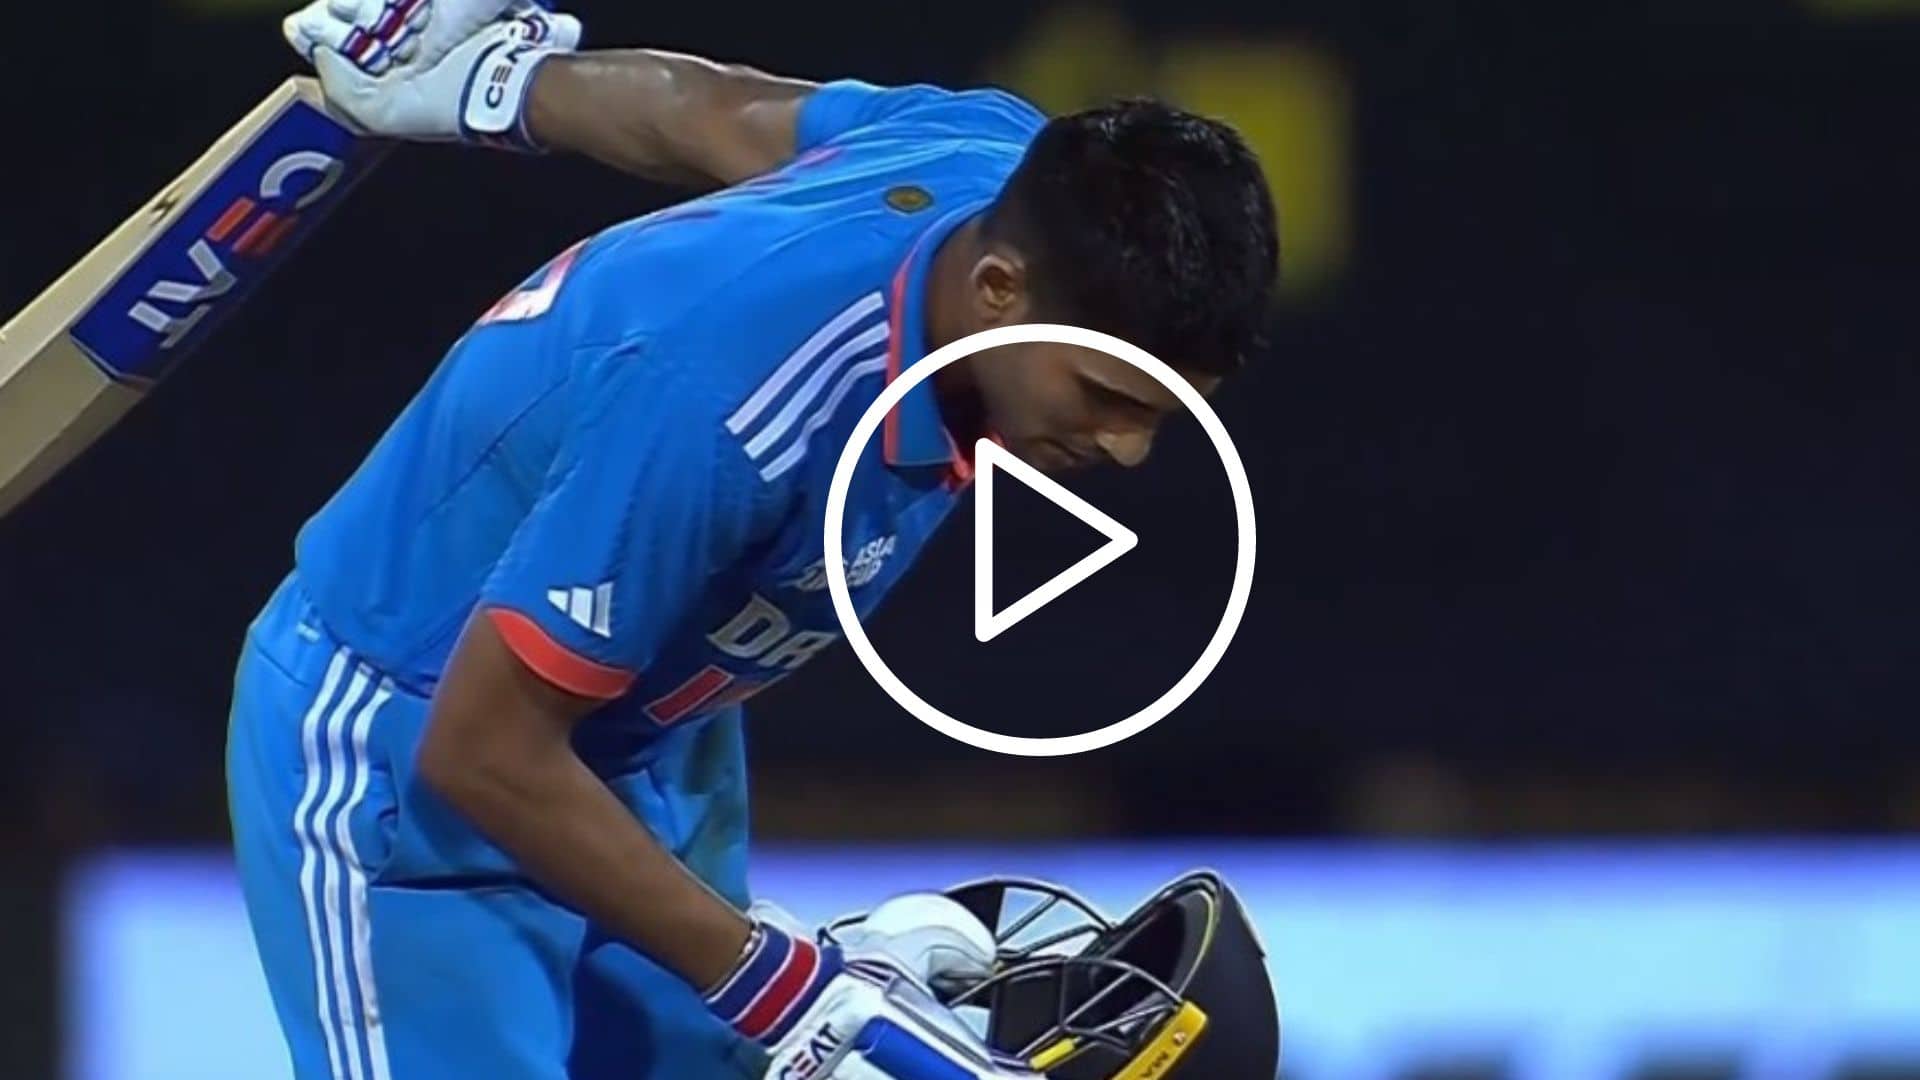 [Watch] Shubman Gill Does His Trademark Celebration After Fifth ODI Century